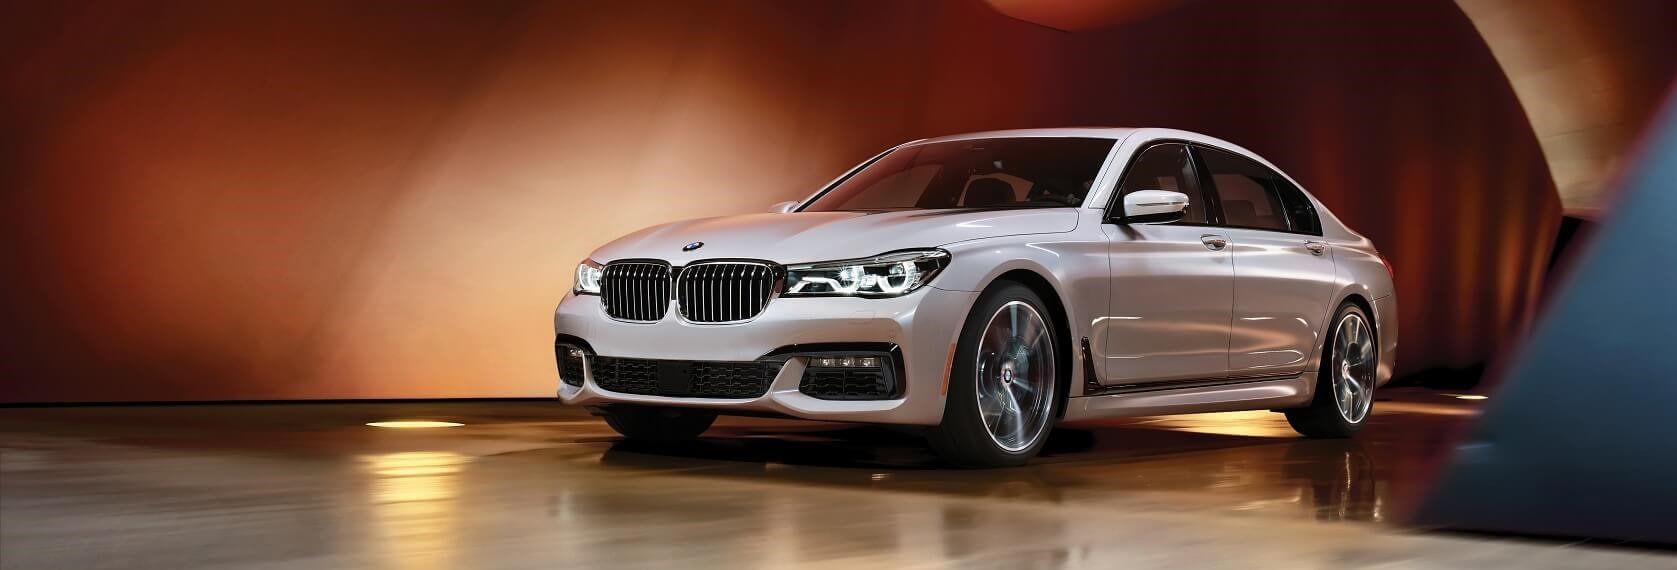 BMW 7 Series Lease Cleveland OH BMW Cleveland